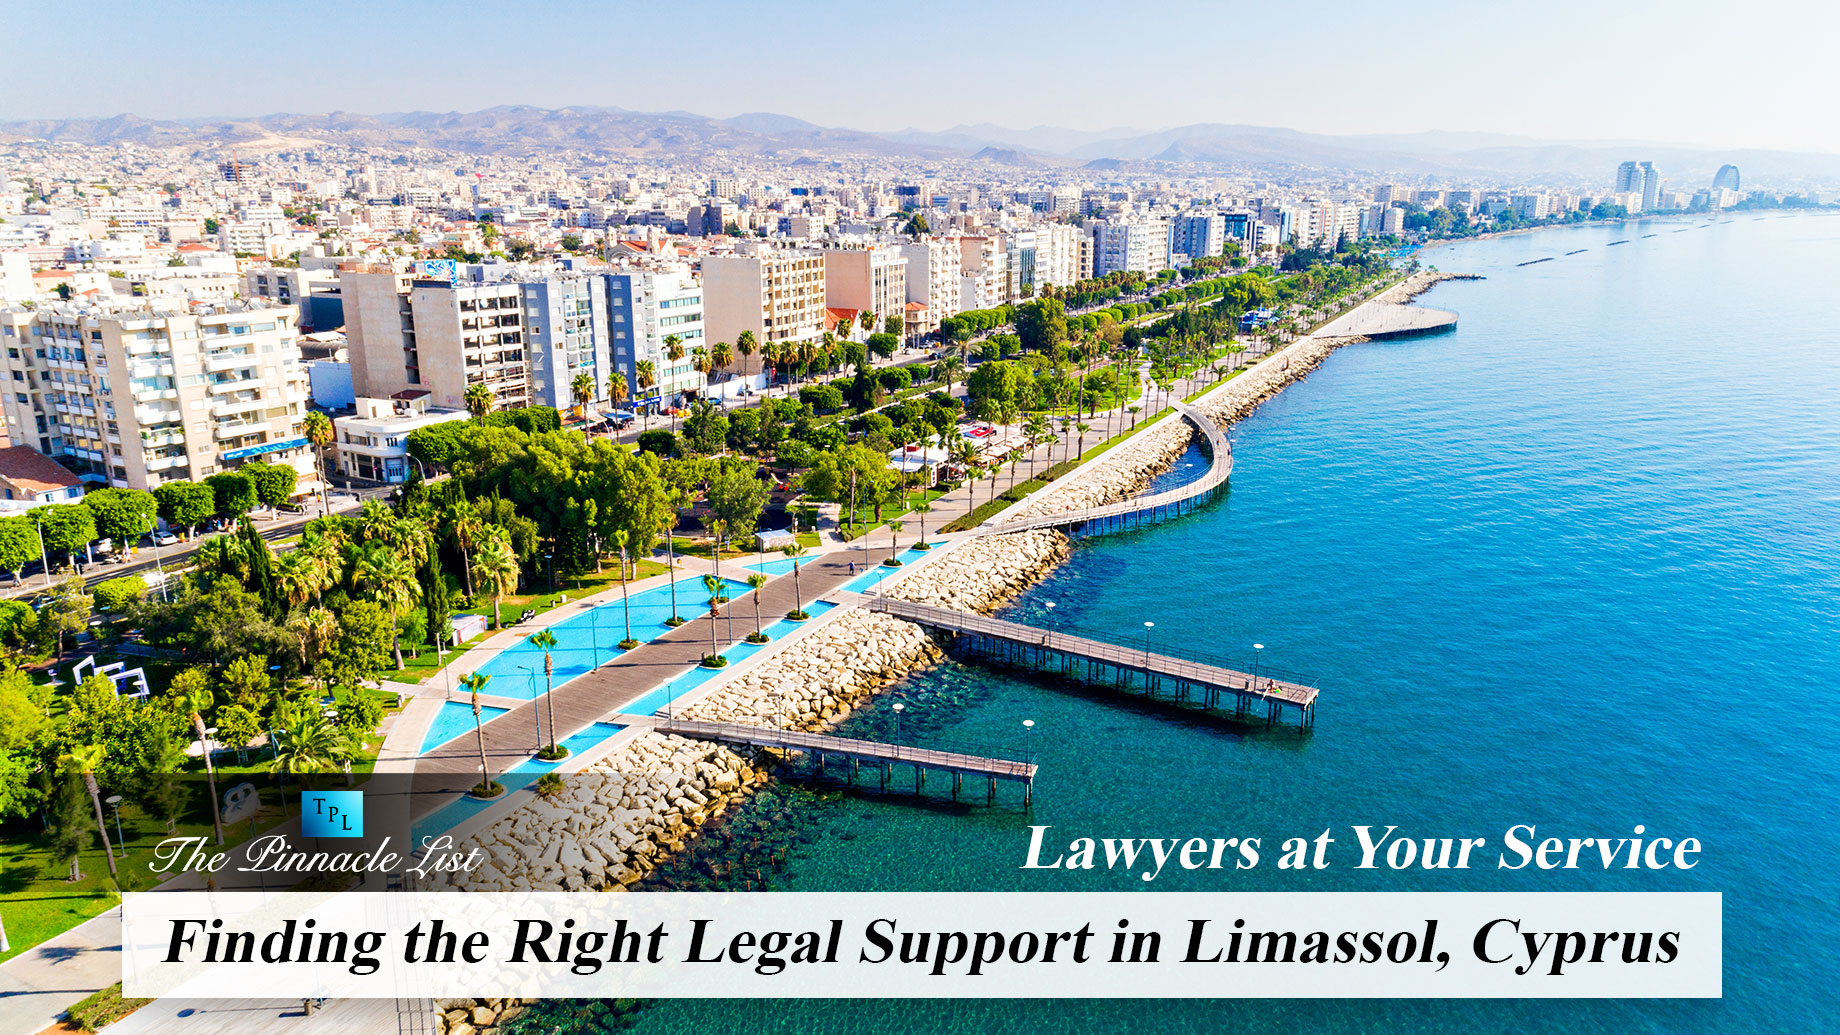 Lawyers at Your Service: Finding the Right Legal Support in Limassol, Cyprus